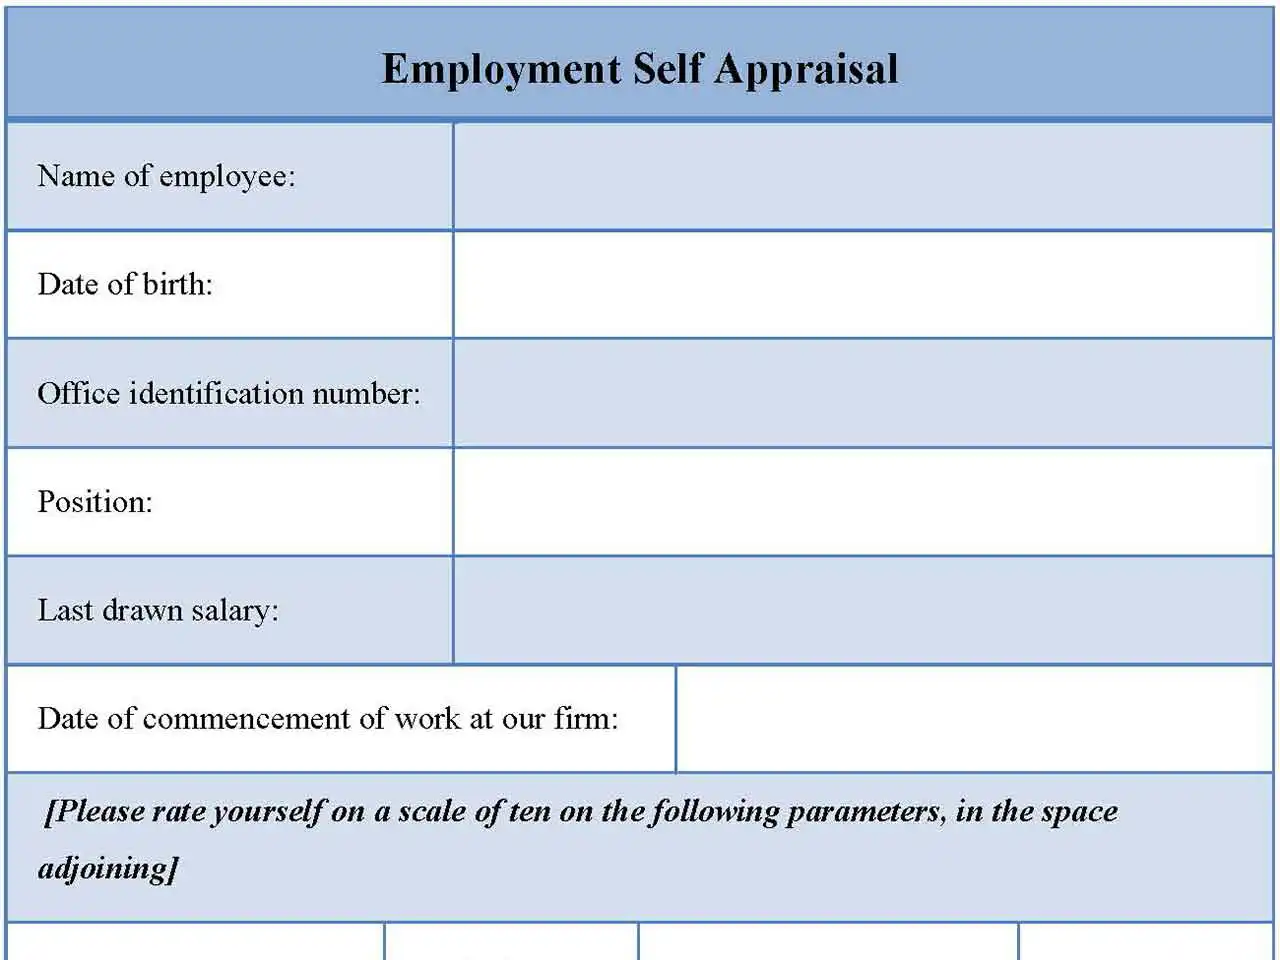 Employment Self Appraisal Fillable PDF Form And Word Document